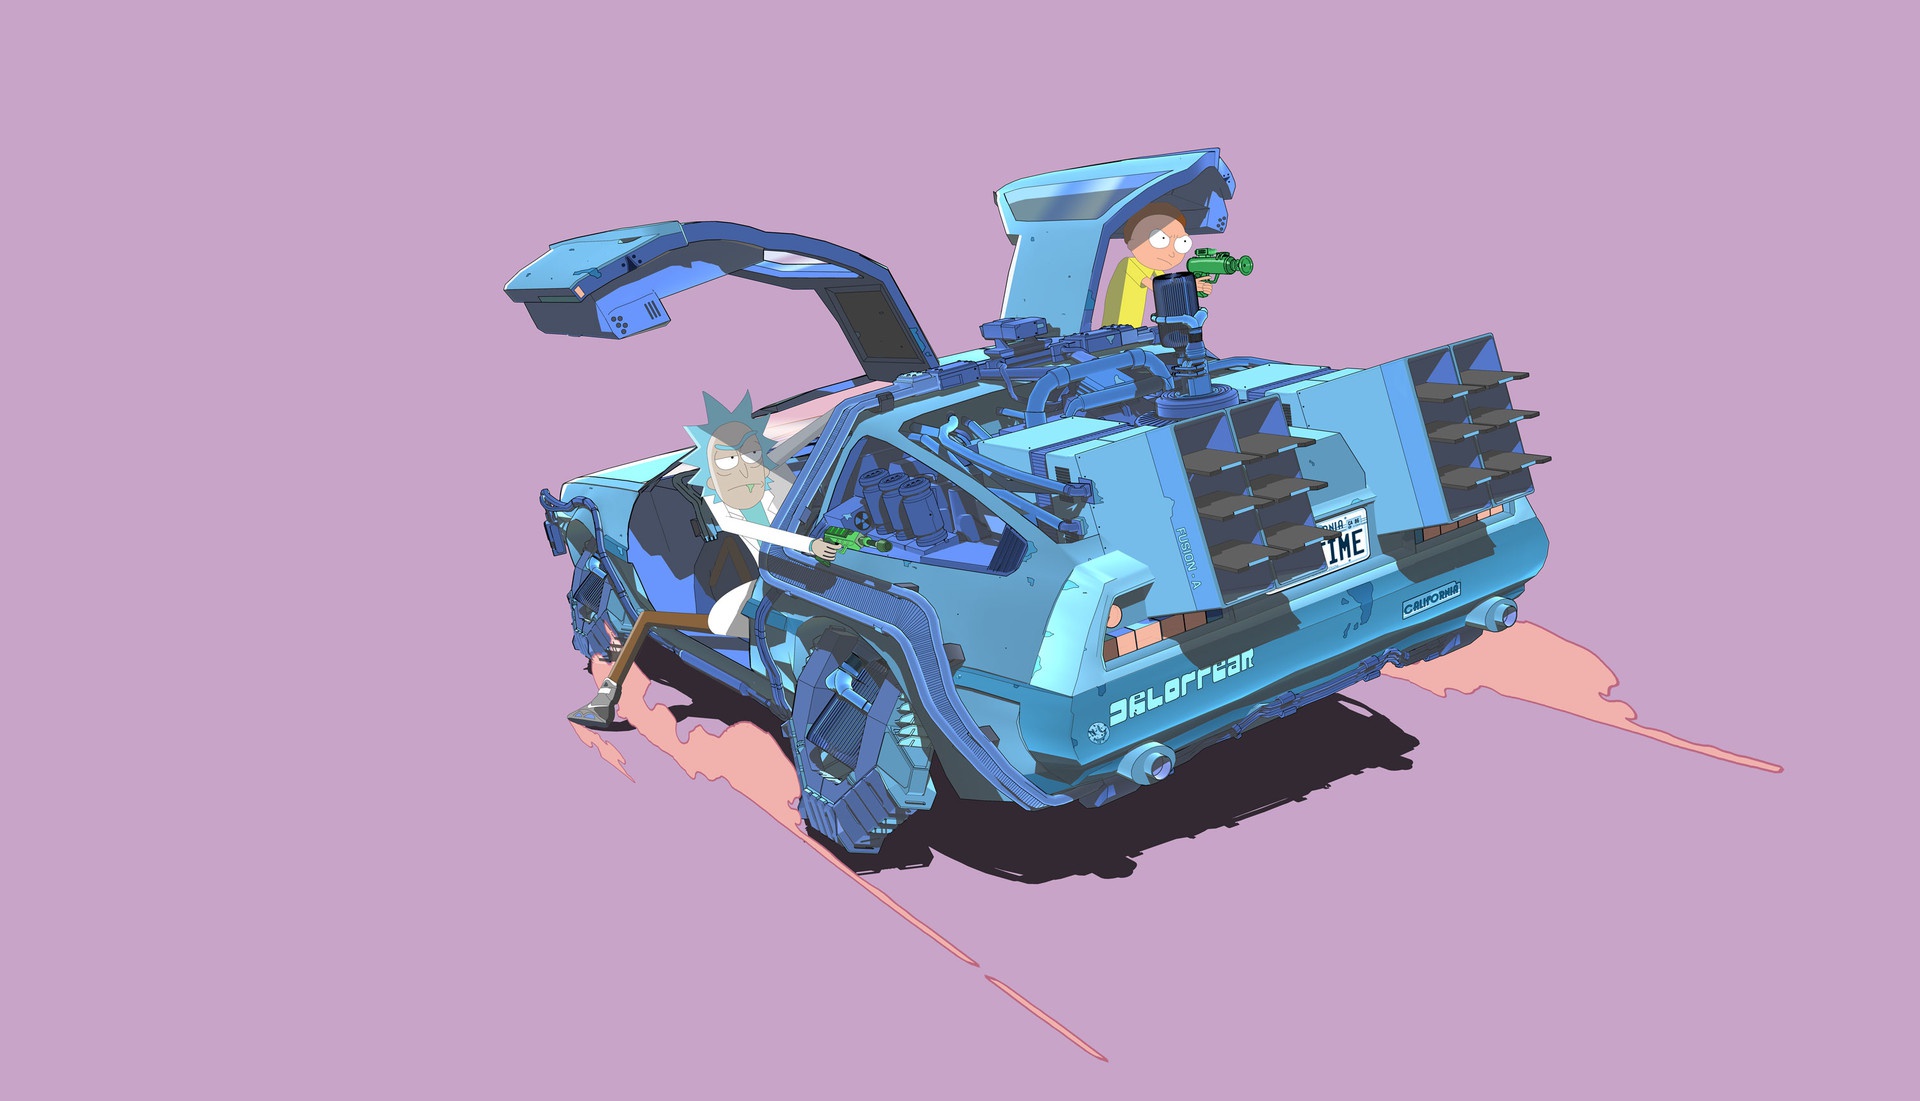 General 1920x1101 Rick and Morty simple background DeLorean Time Machine car vehicle